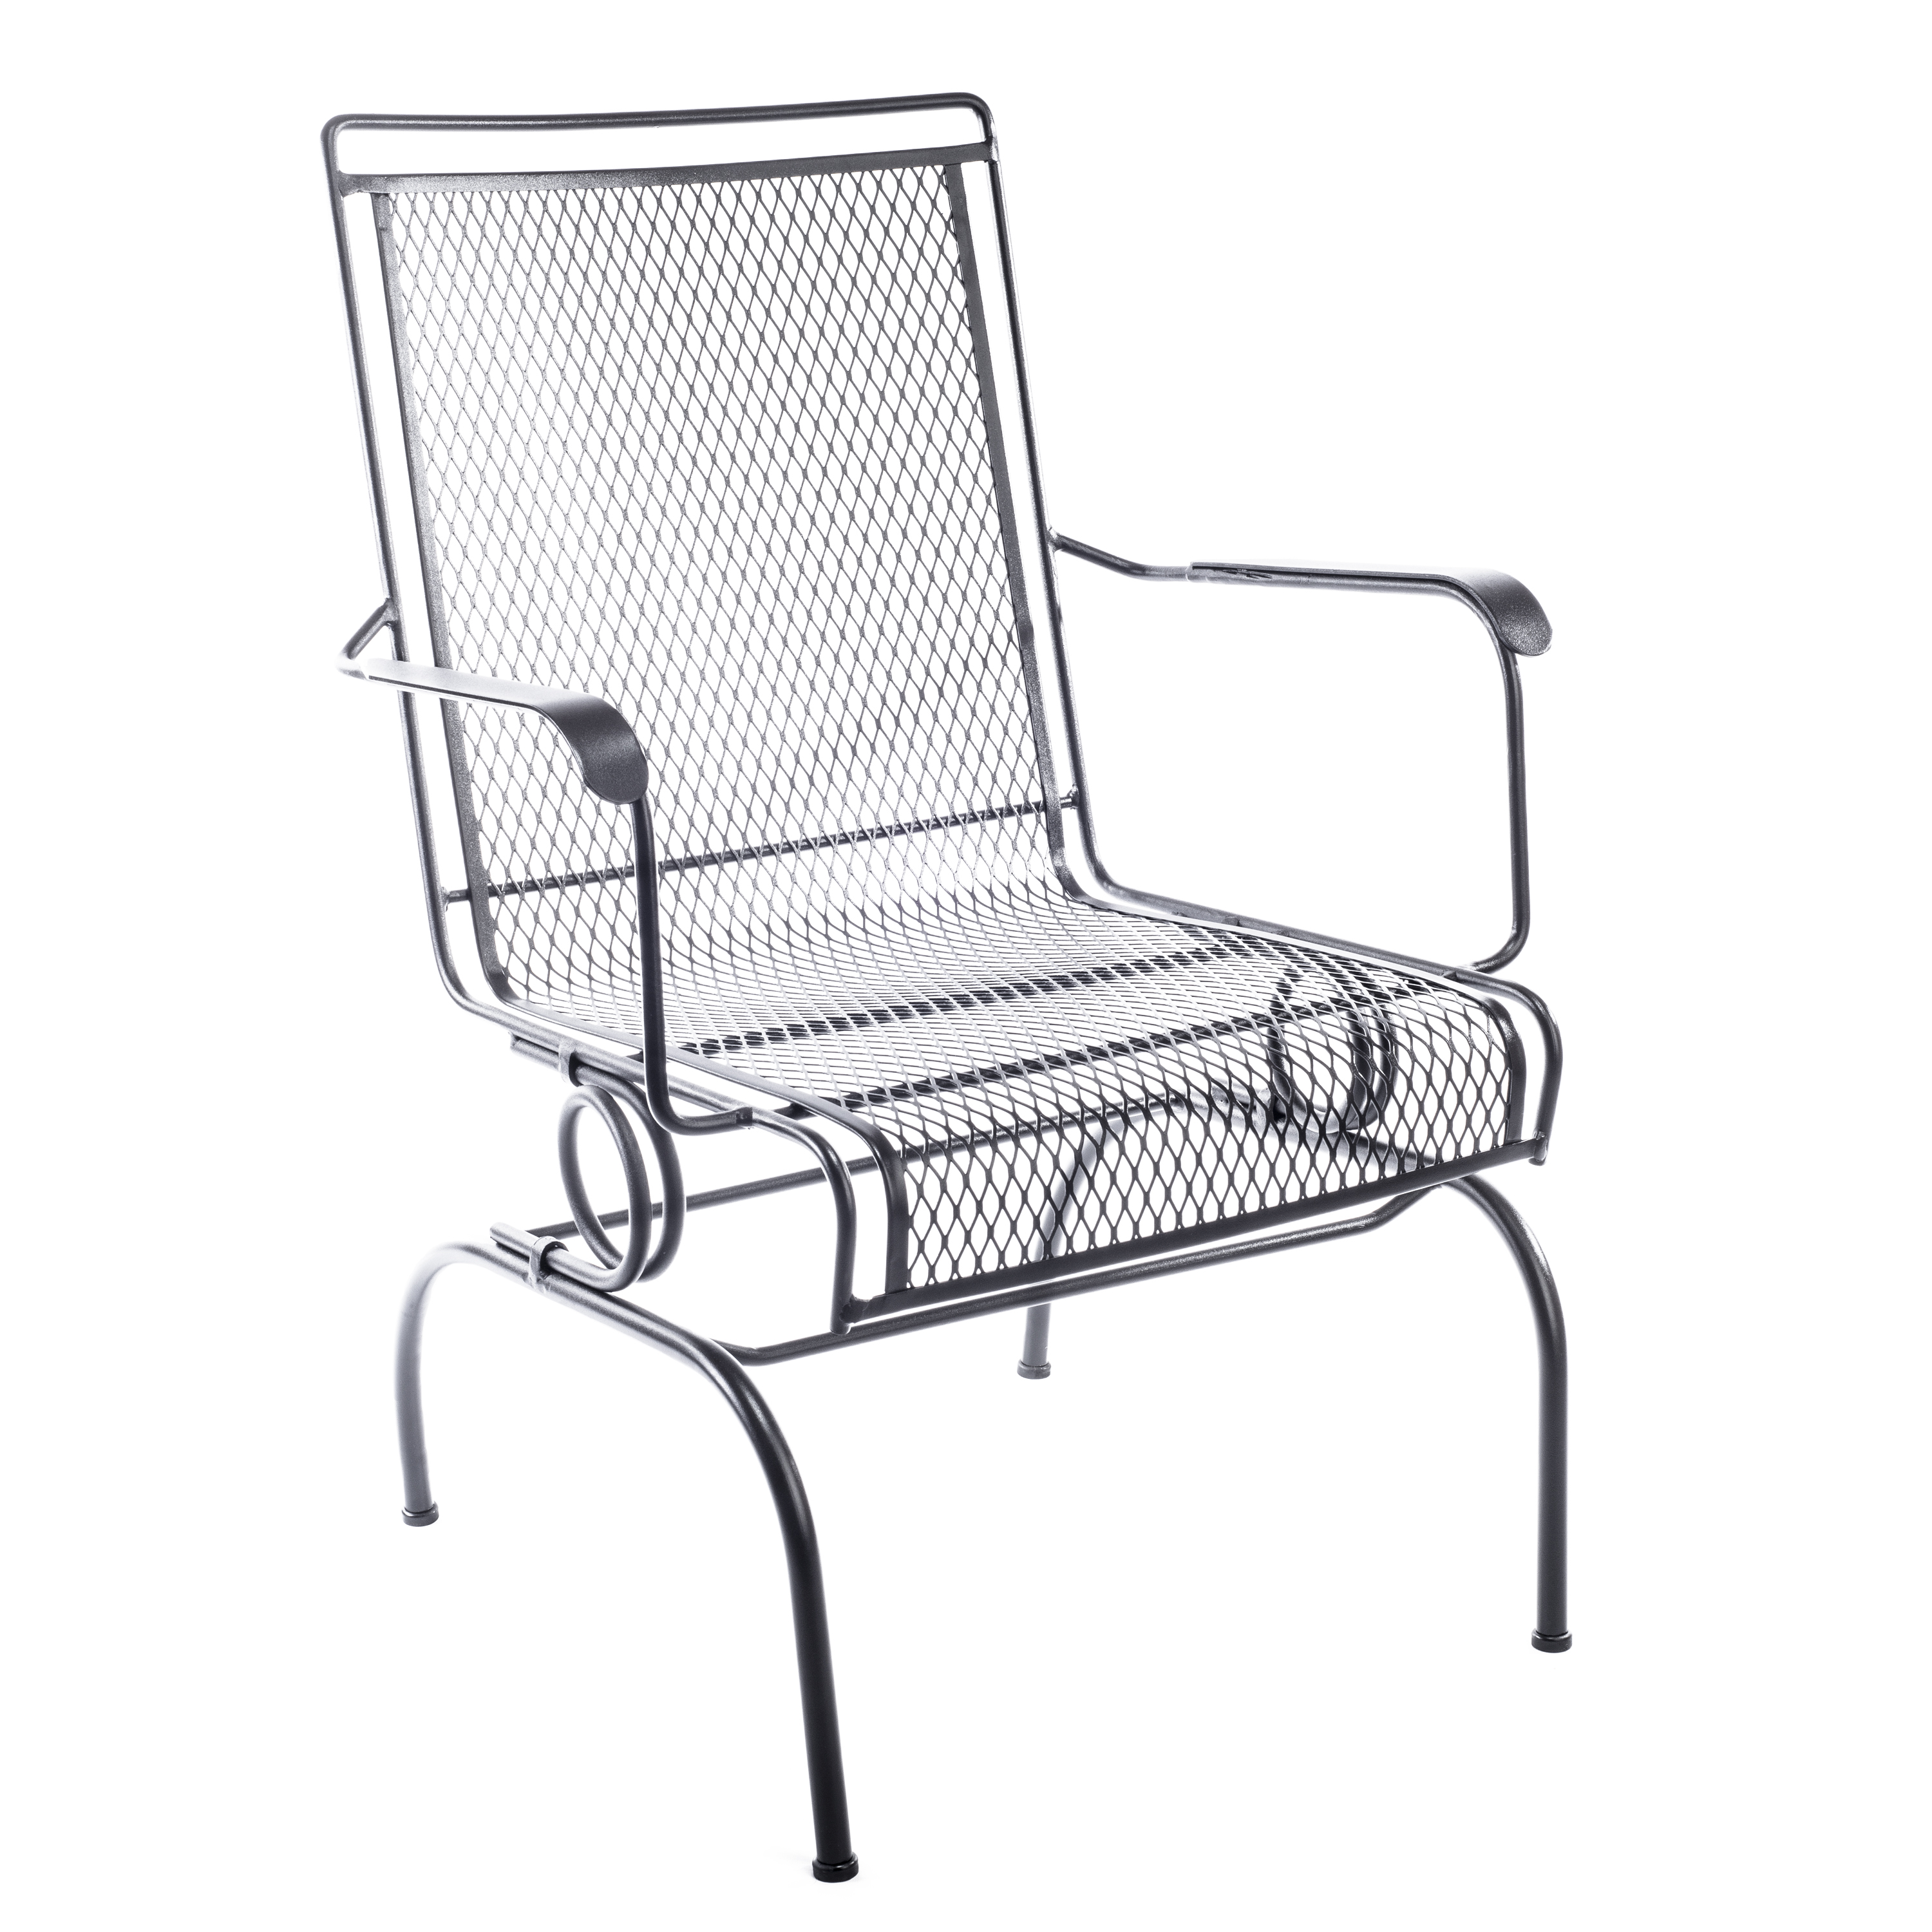 Arlington House Wrought Iron Outdoor Action Dining Chair, Charcoal - image 2 of 5